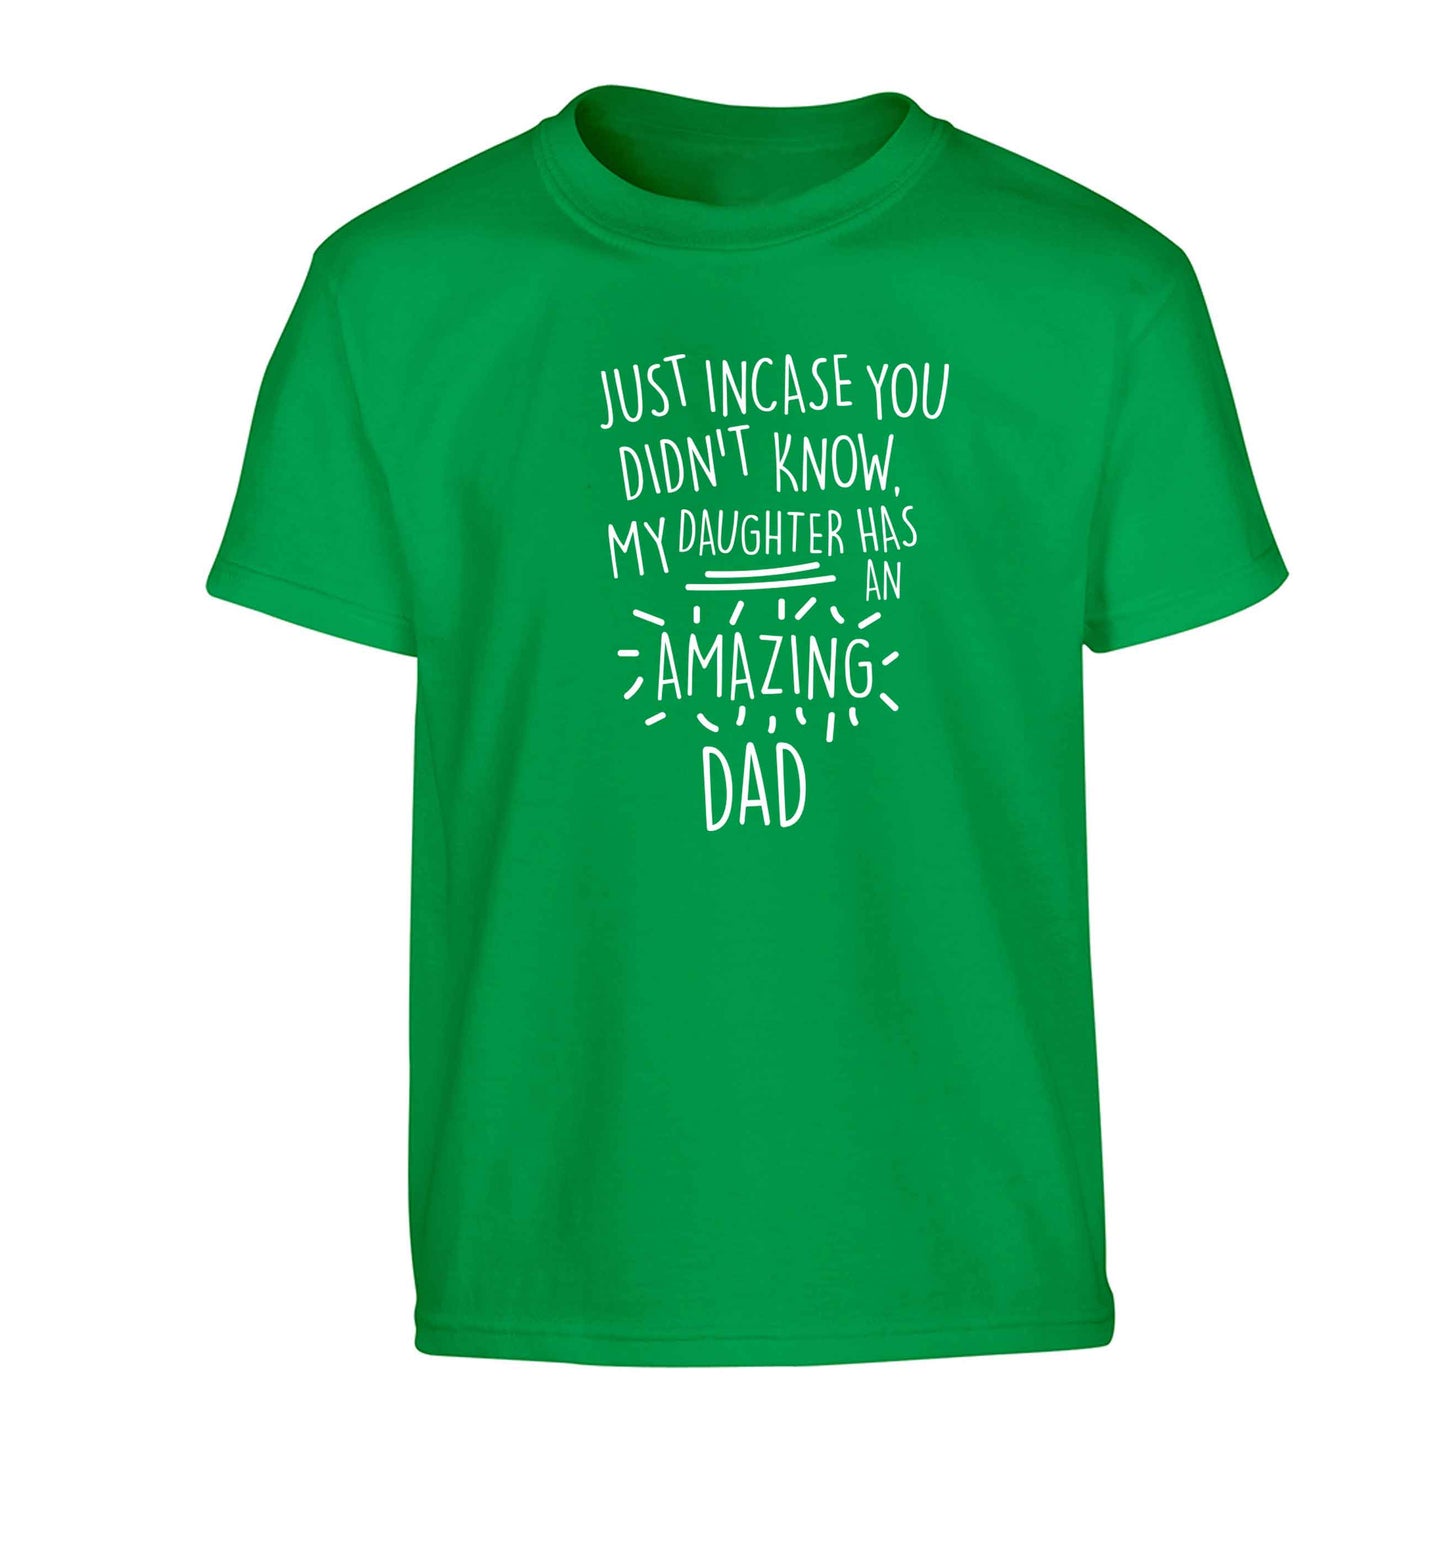 Just incase you didn't know my daughter has an amazing dad Children's green Tshirt 12-13 Years